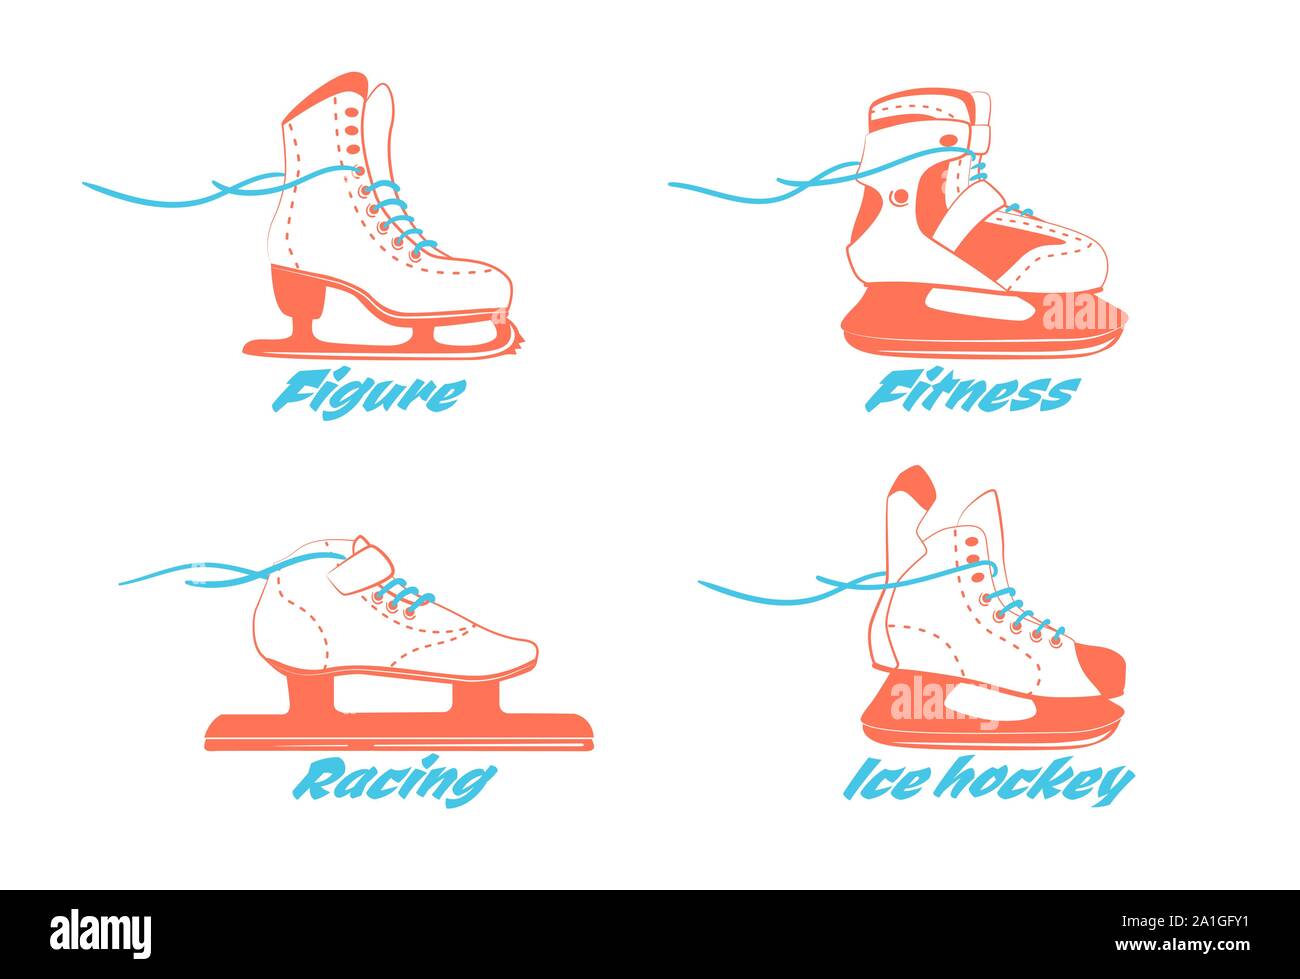 set of different ice skates - figure, fitness, Racing, hockey. Type of ice skate boots. Winter sport equipment logo in vintage colors. Vector Illustration isolated on white background. Stock Vector